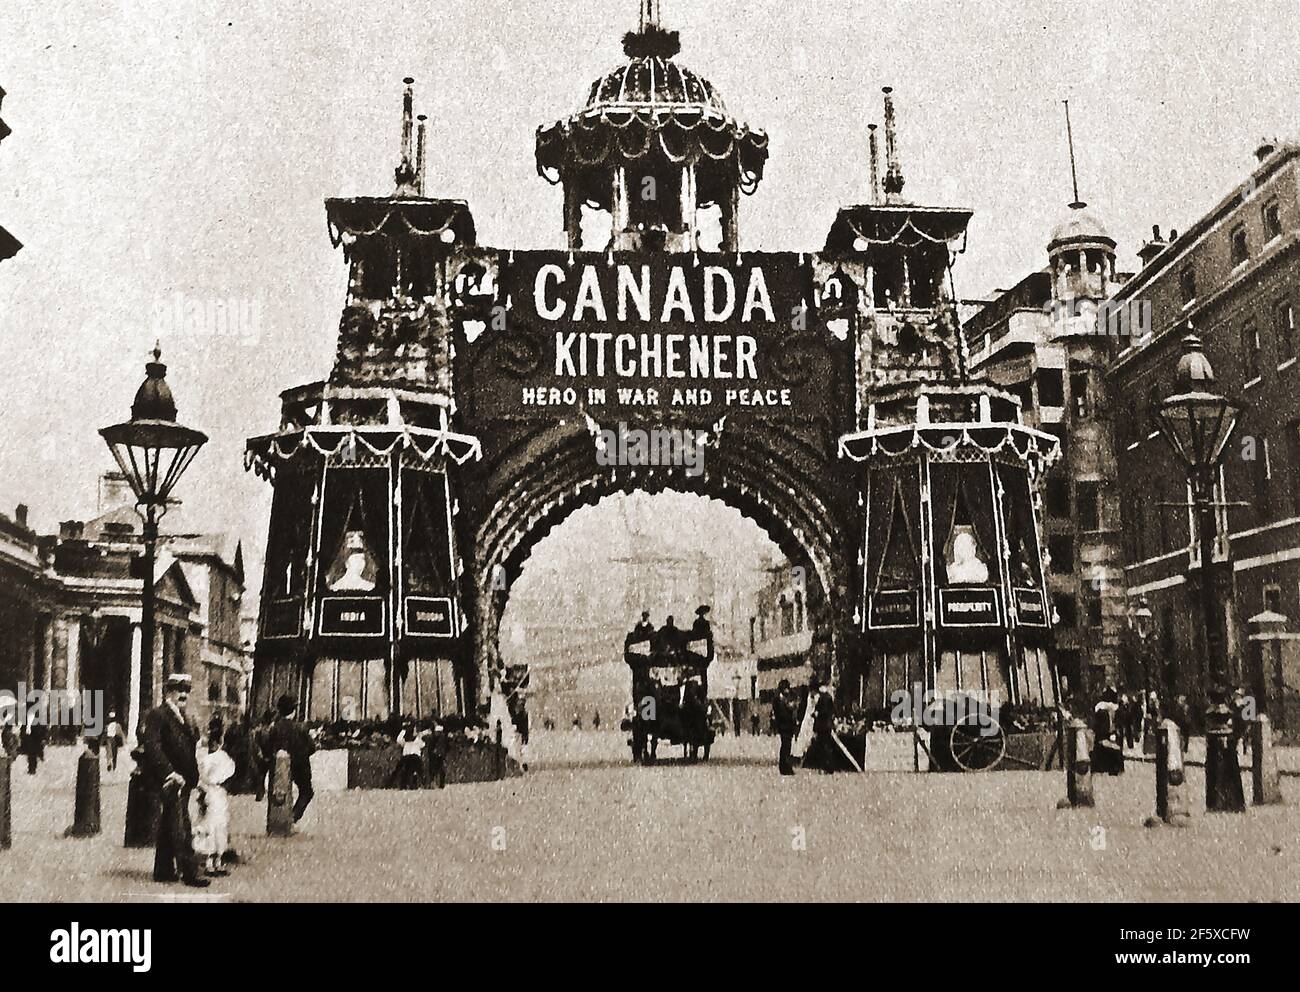 Summer 1902. London decorates the streets for the Coronation celebration of the coronation of Edward VII and his wife Alexandra of Denmark.  Originally scheduled for 26 June of that year, the ceremony had been postponed at very short notice, because the King had been taken ill  and had to be hospitalised. This photo shows the Canadian Arch situated at Westminster in Whitehall close to the cenotaph, Stock Photo